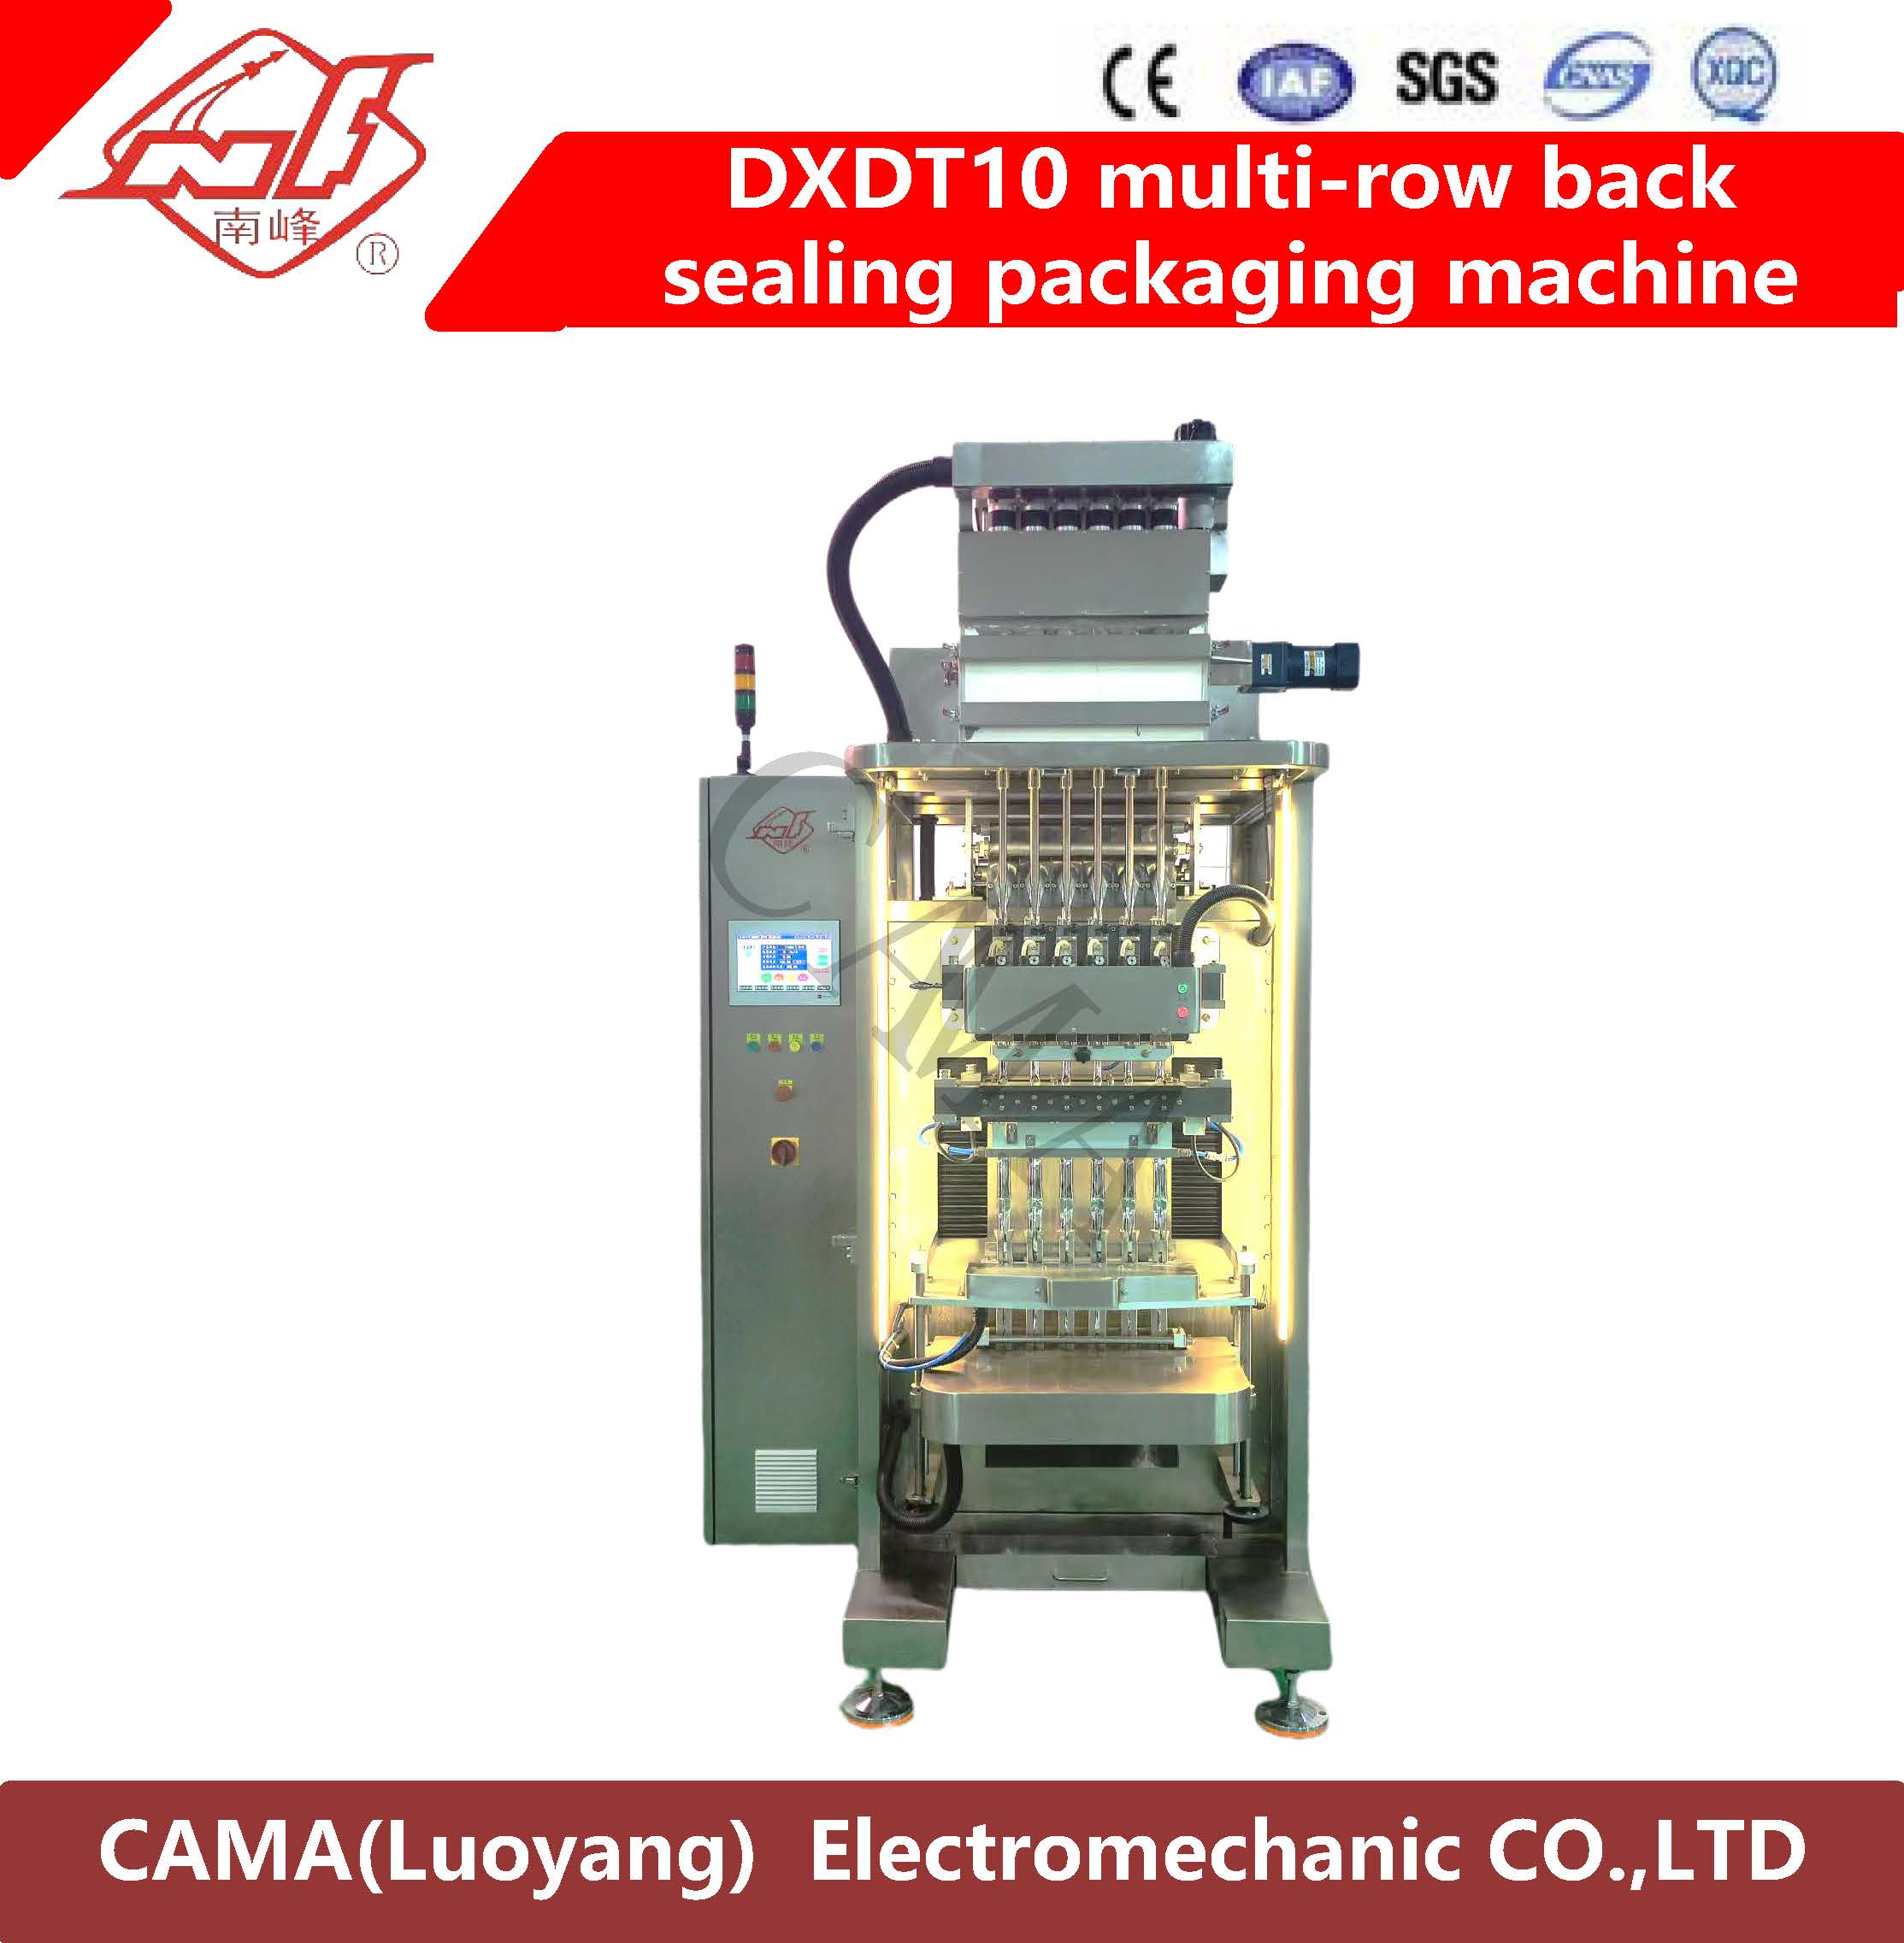 DXDT10 multi-row back sealing packaging machine